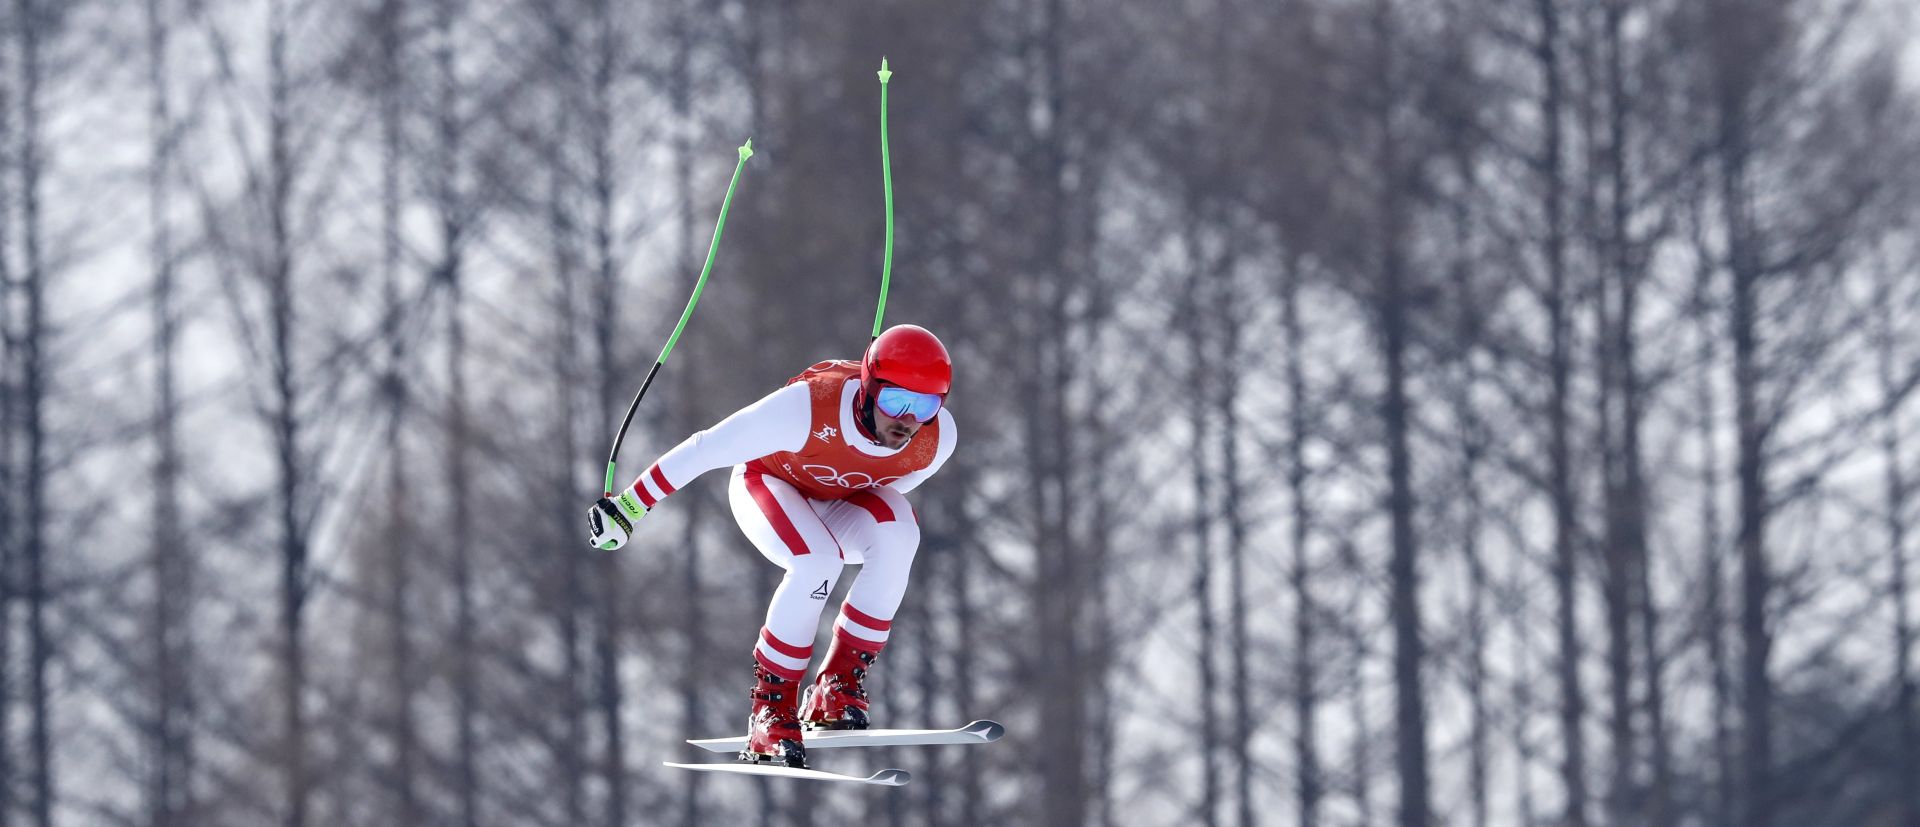 epaselect Marcel Hirscher of Austria speeds down the slope during a training session for the Men's Downhill race at the Jeongseon Alpine Centre during the PyeongChang 2018 Olympic Games, South Korea, 09 February 2018.  EPA/GUILLAUME HORCAJUELO  EPA-EFE/GUILLAUME HORCAJUELO